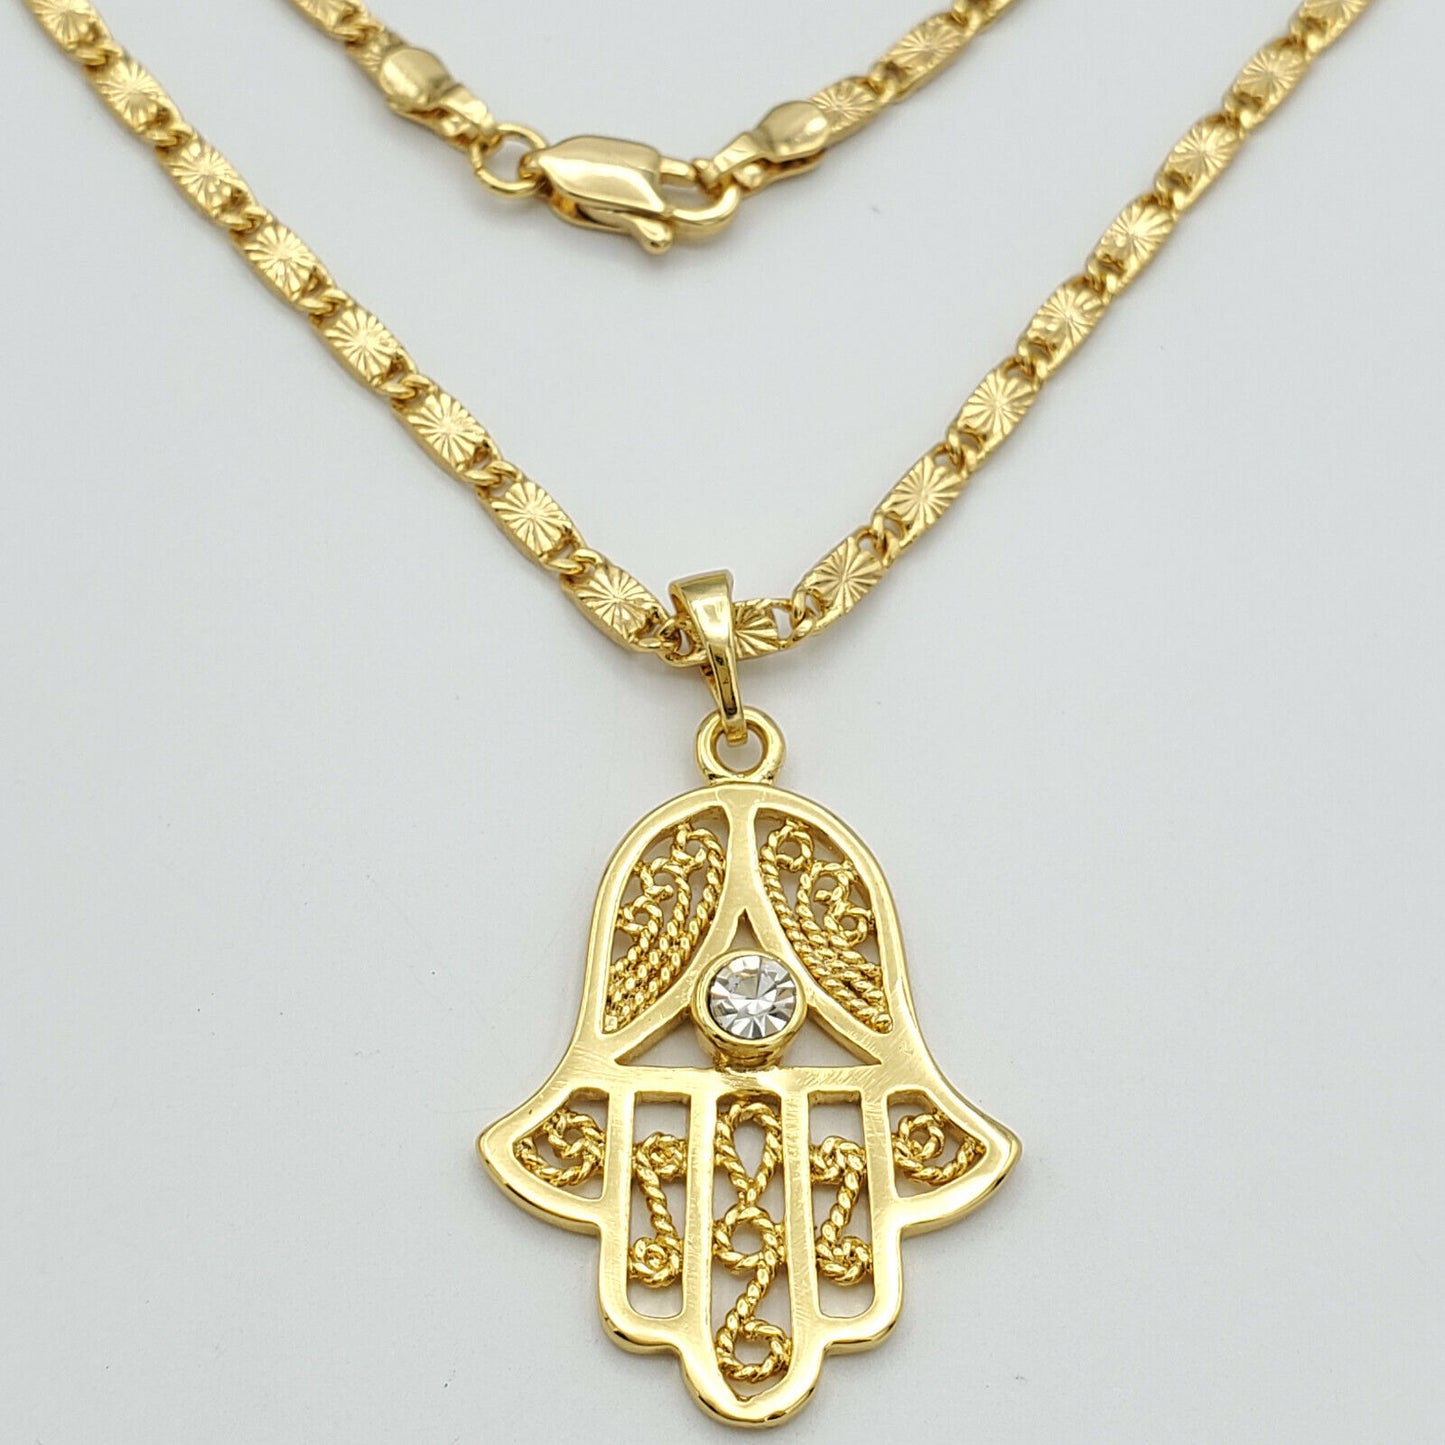 Necklaces - 24K Gold Plated. Fashion Hamsa Hand withEye Pendant & Chain.